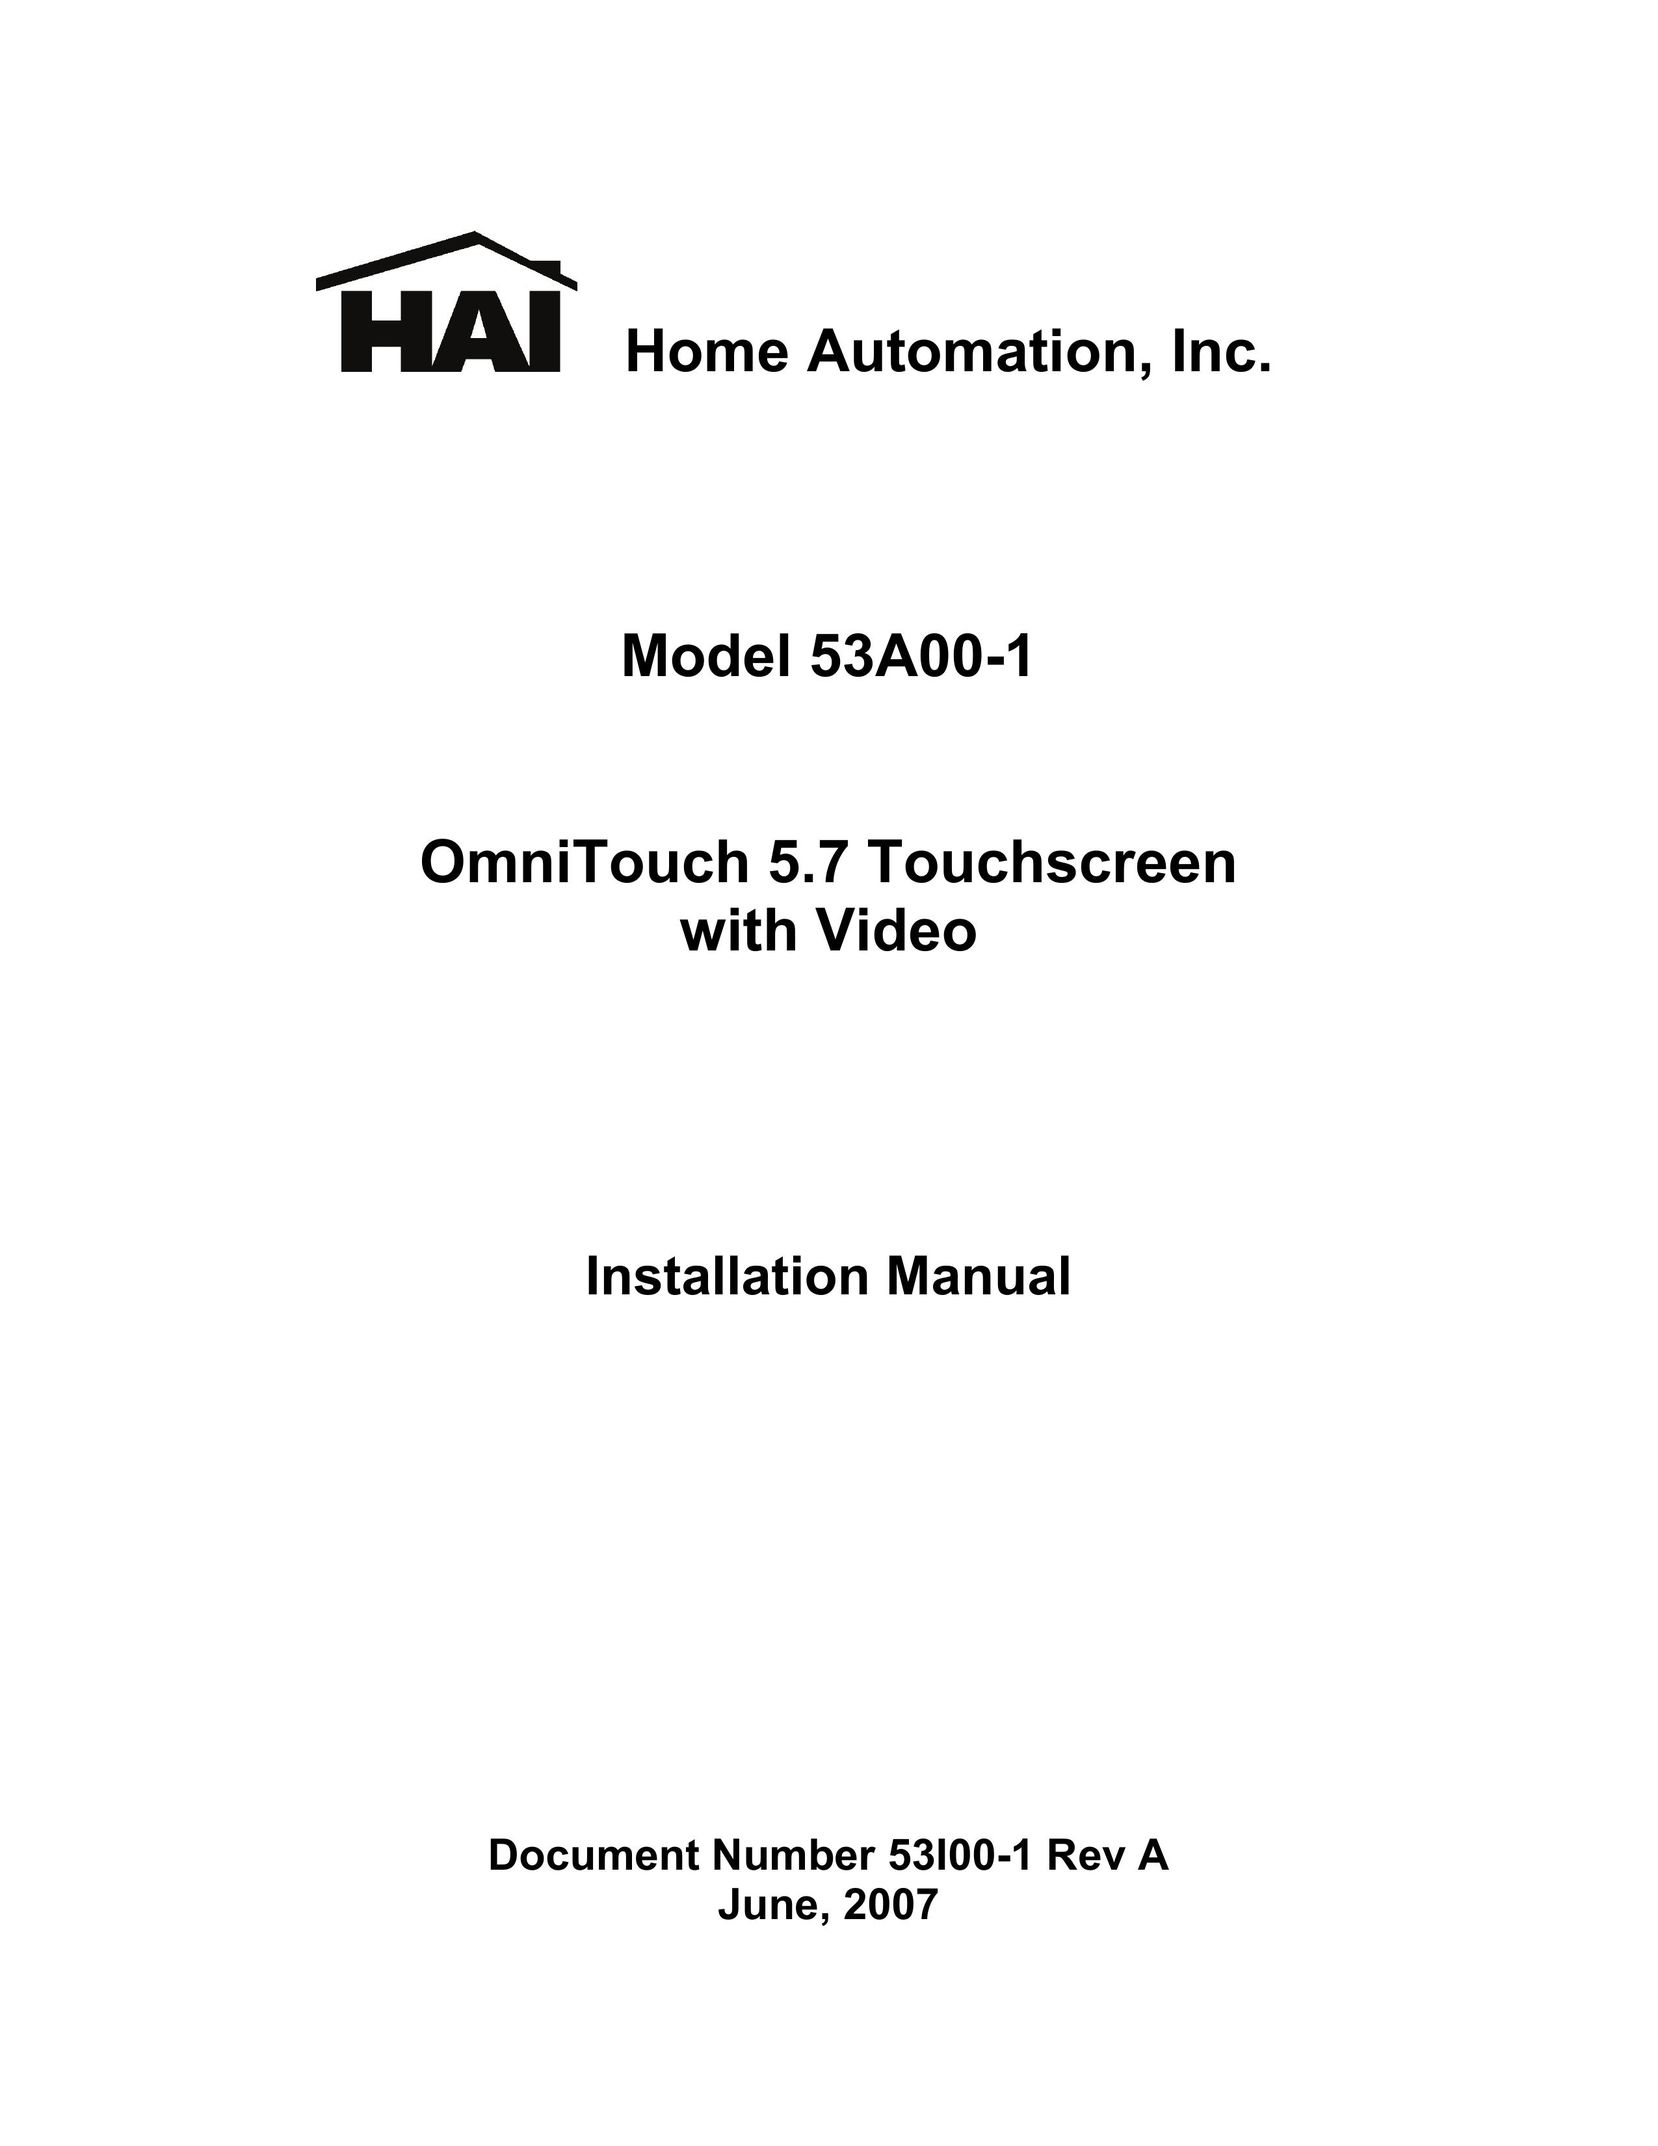 Home Automation 53A00-1 Car Video System User Manual